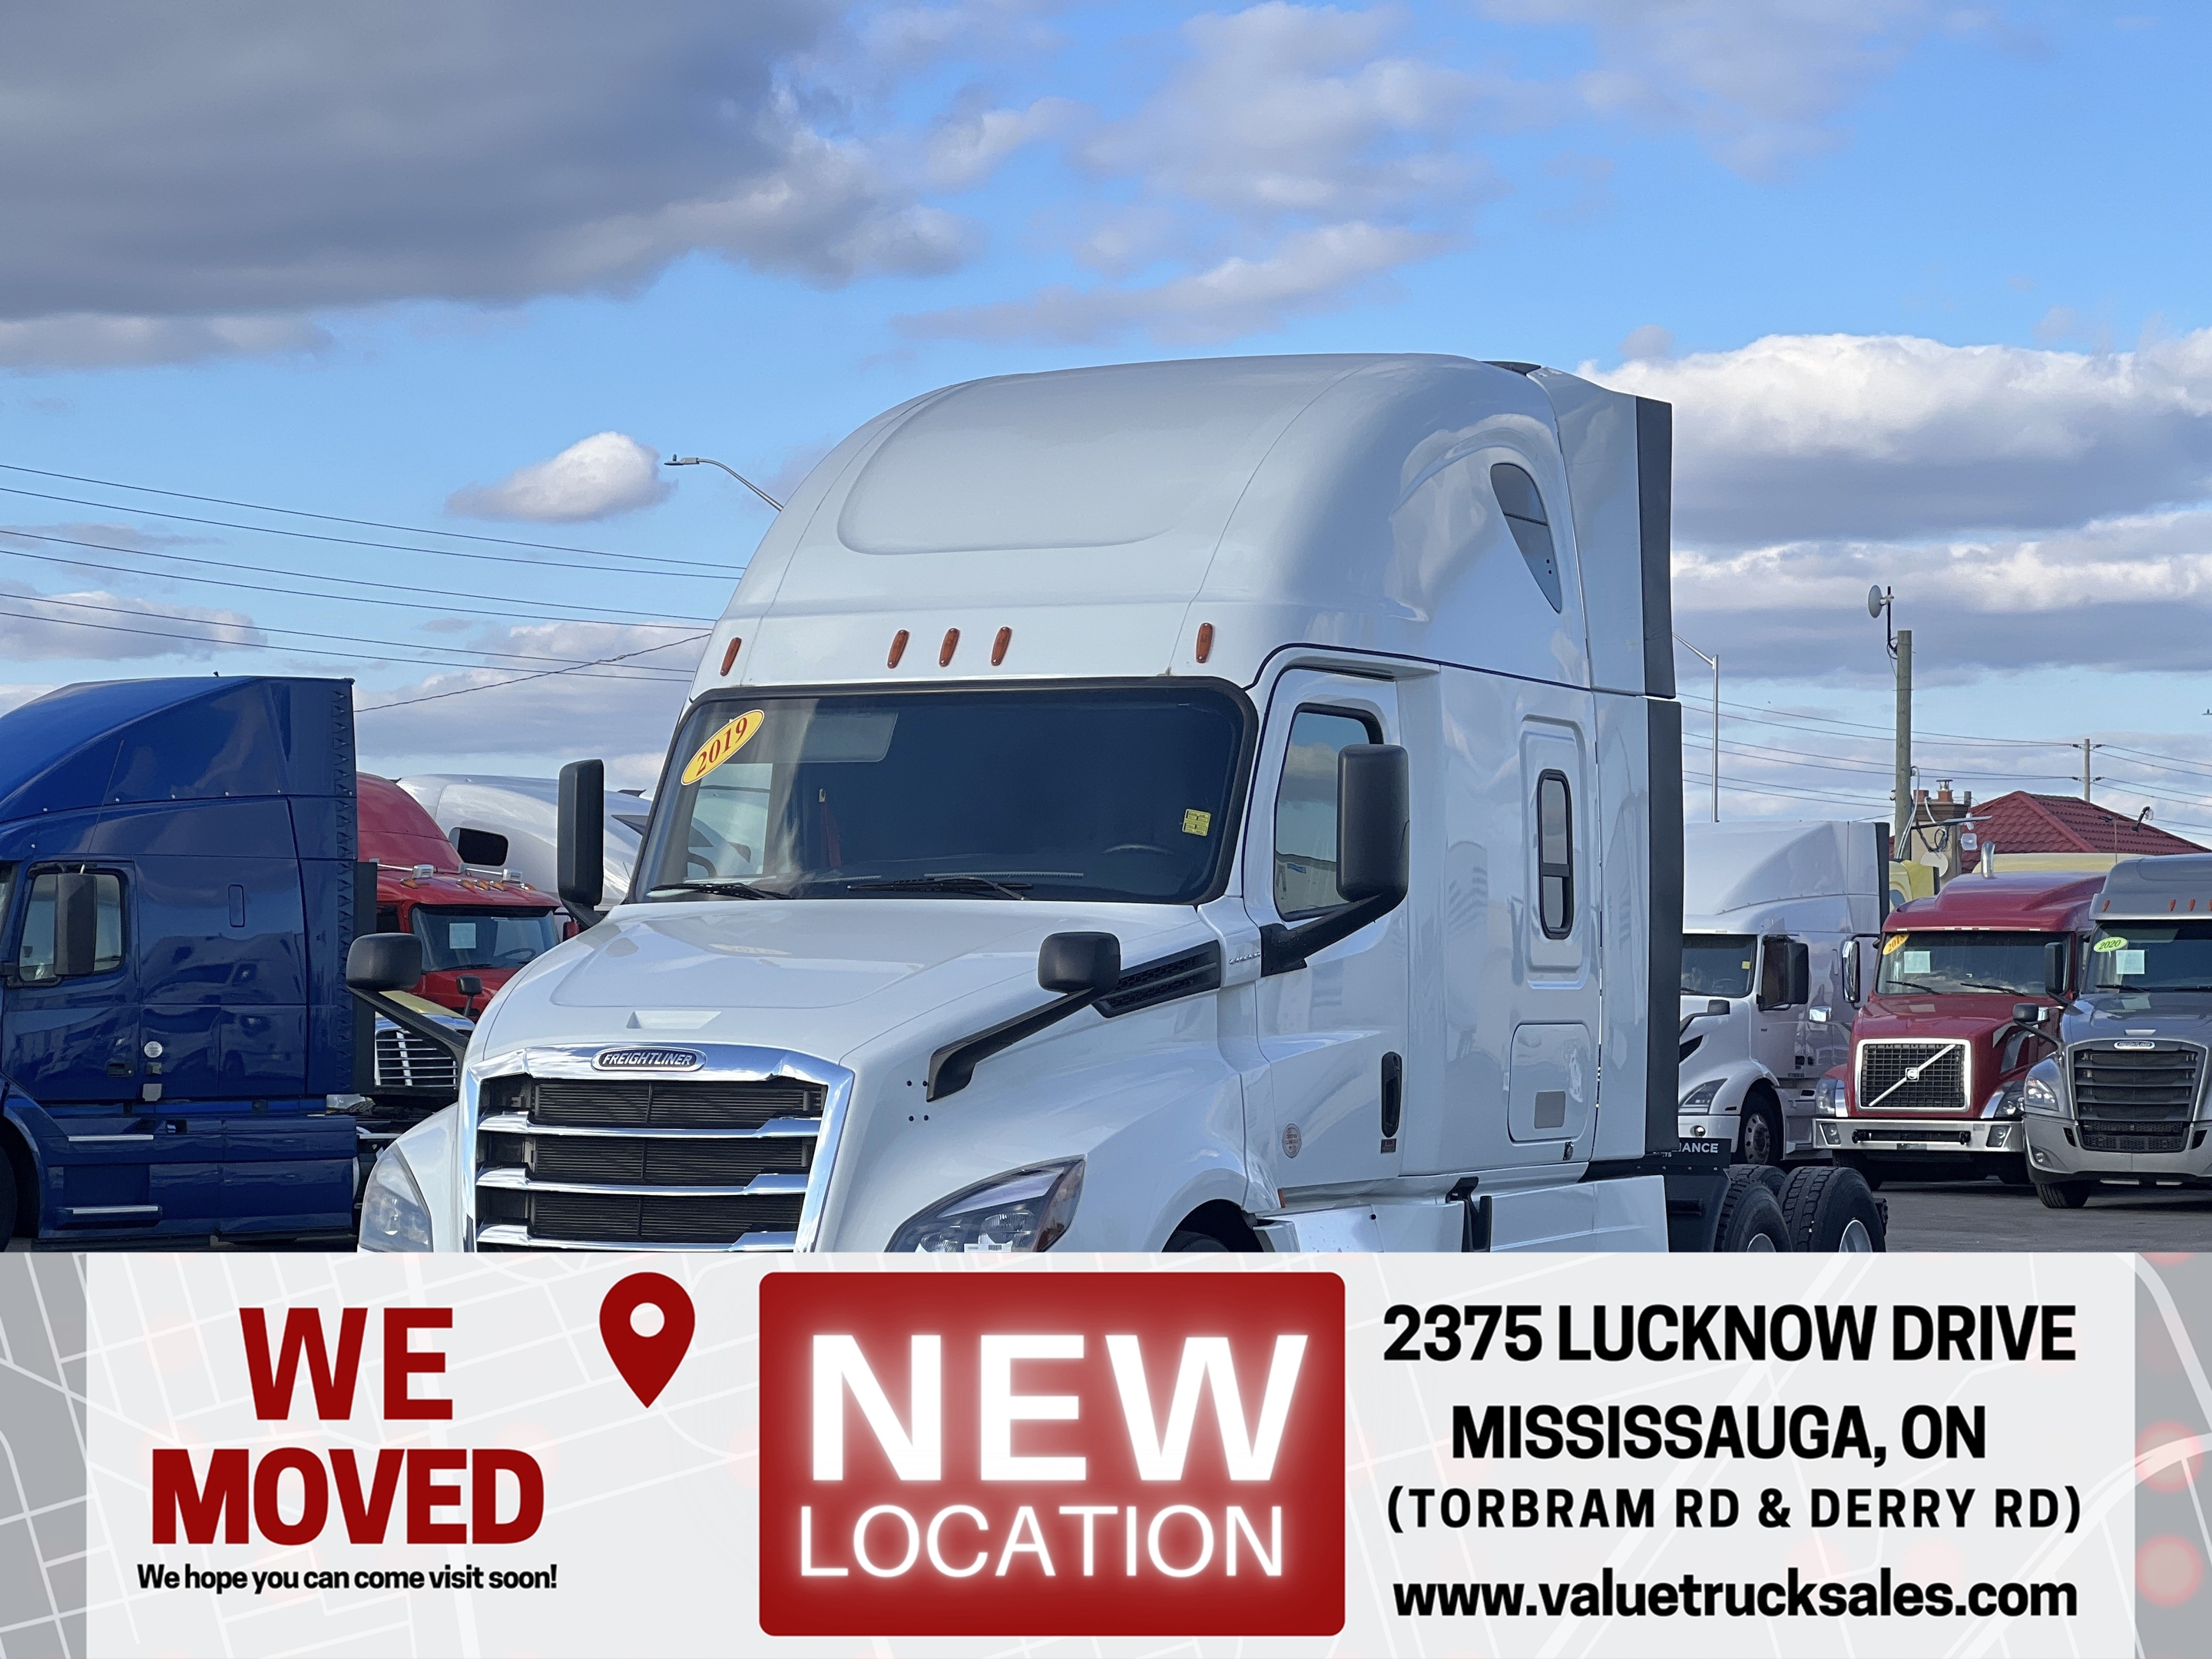 2019 Freightliner Cascadia DD15   455 HP   DT-12   Thermoking APU